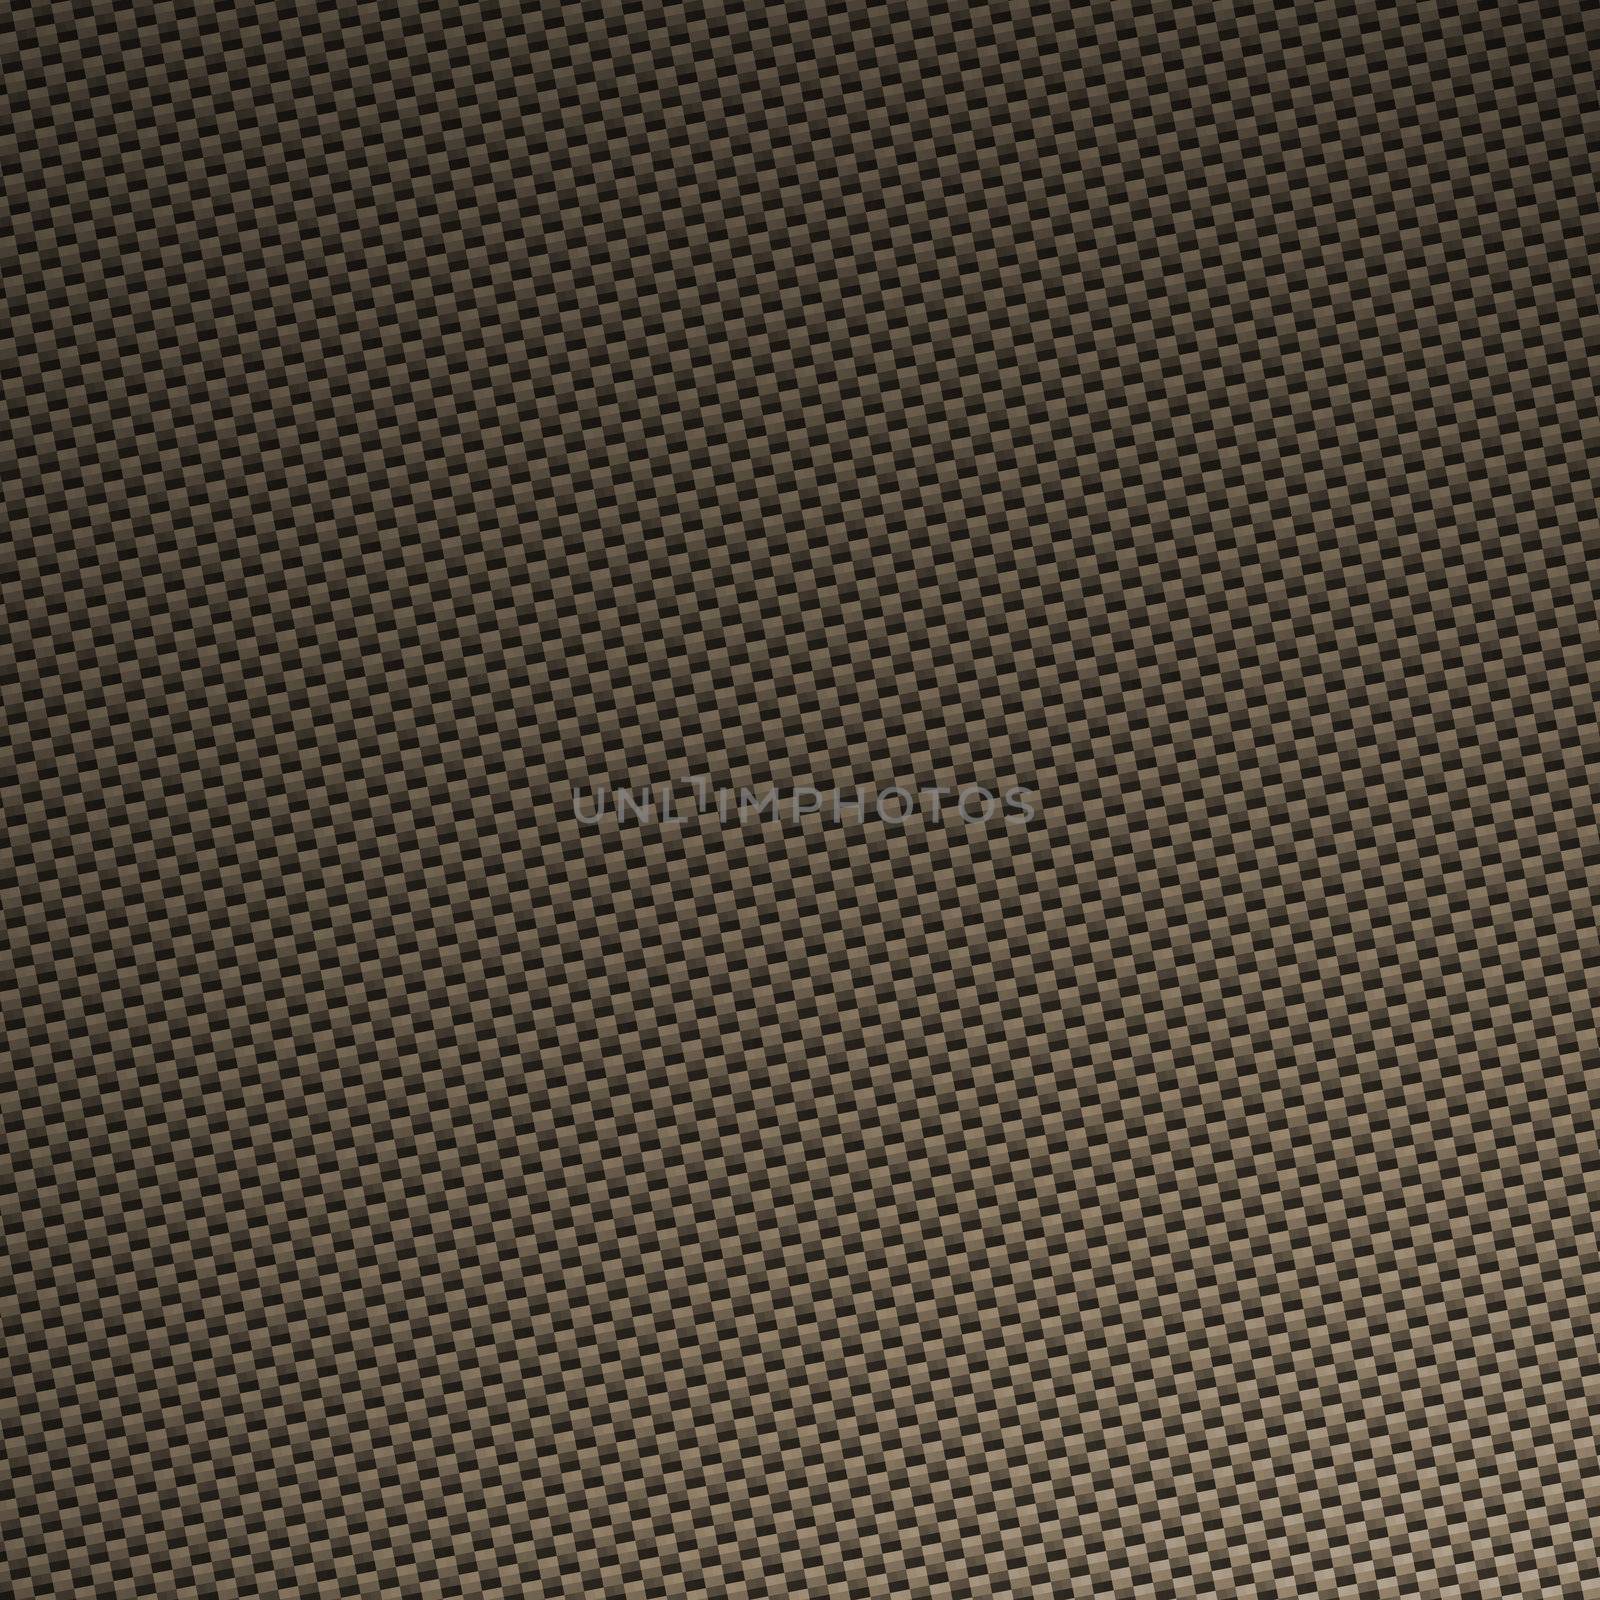 A great high-res carbon fiber pattern / texture that you can apply in both print and web design.